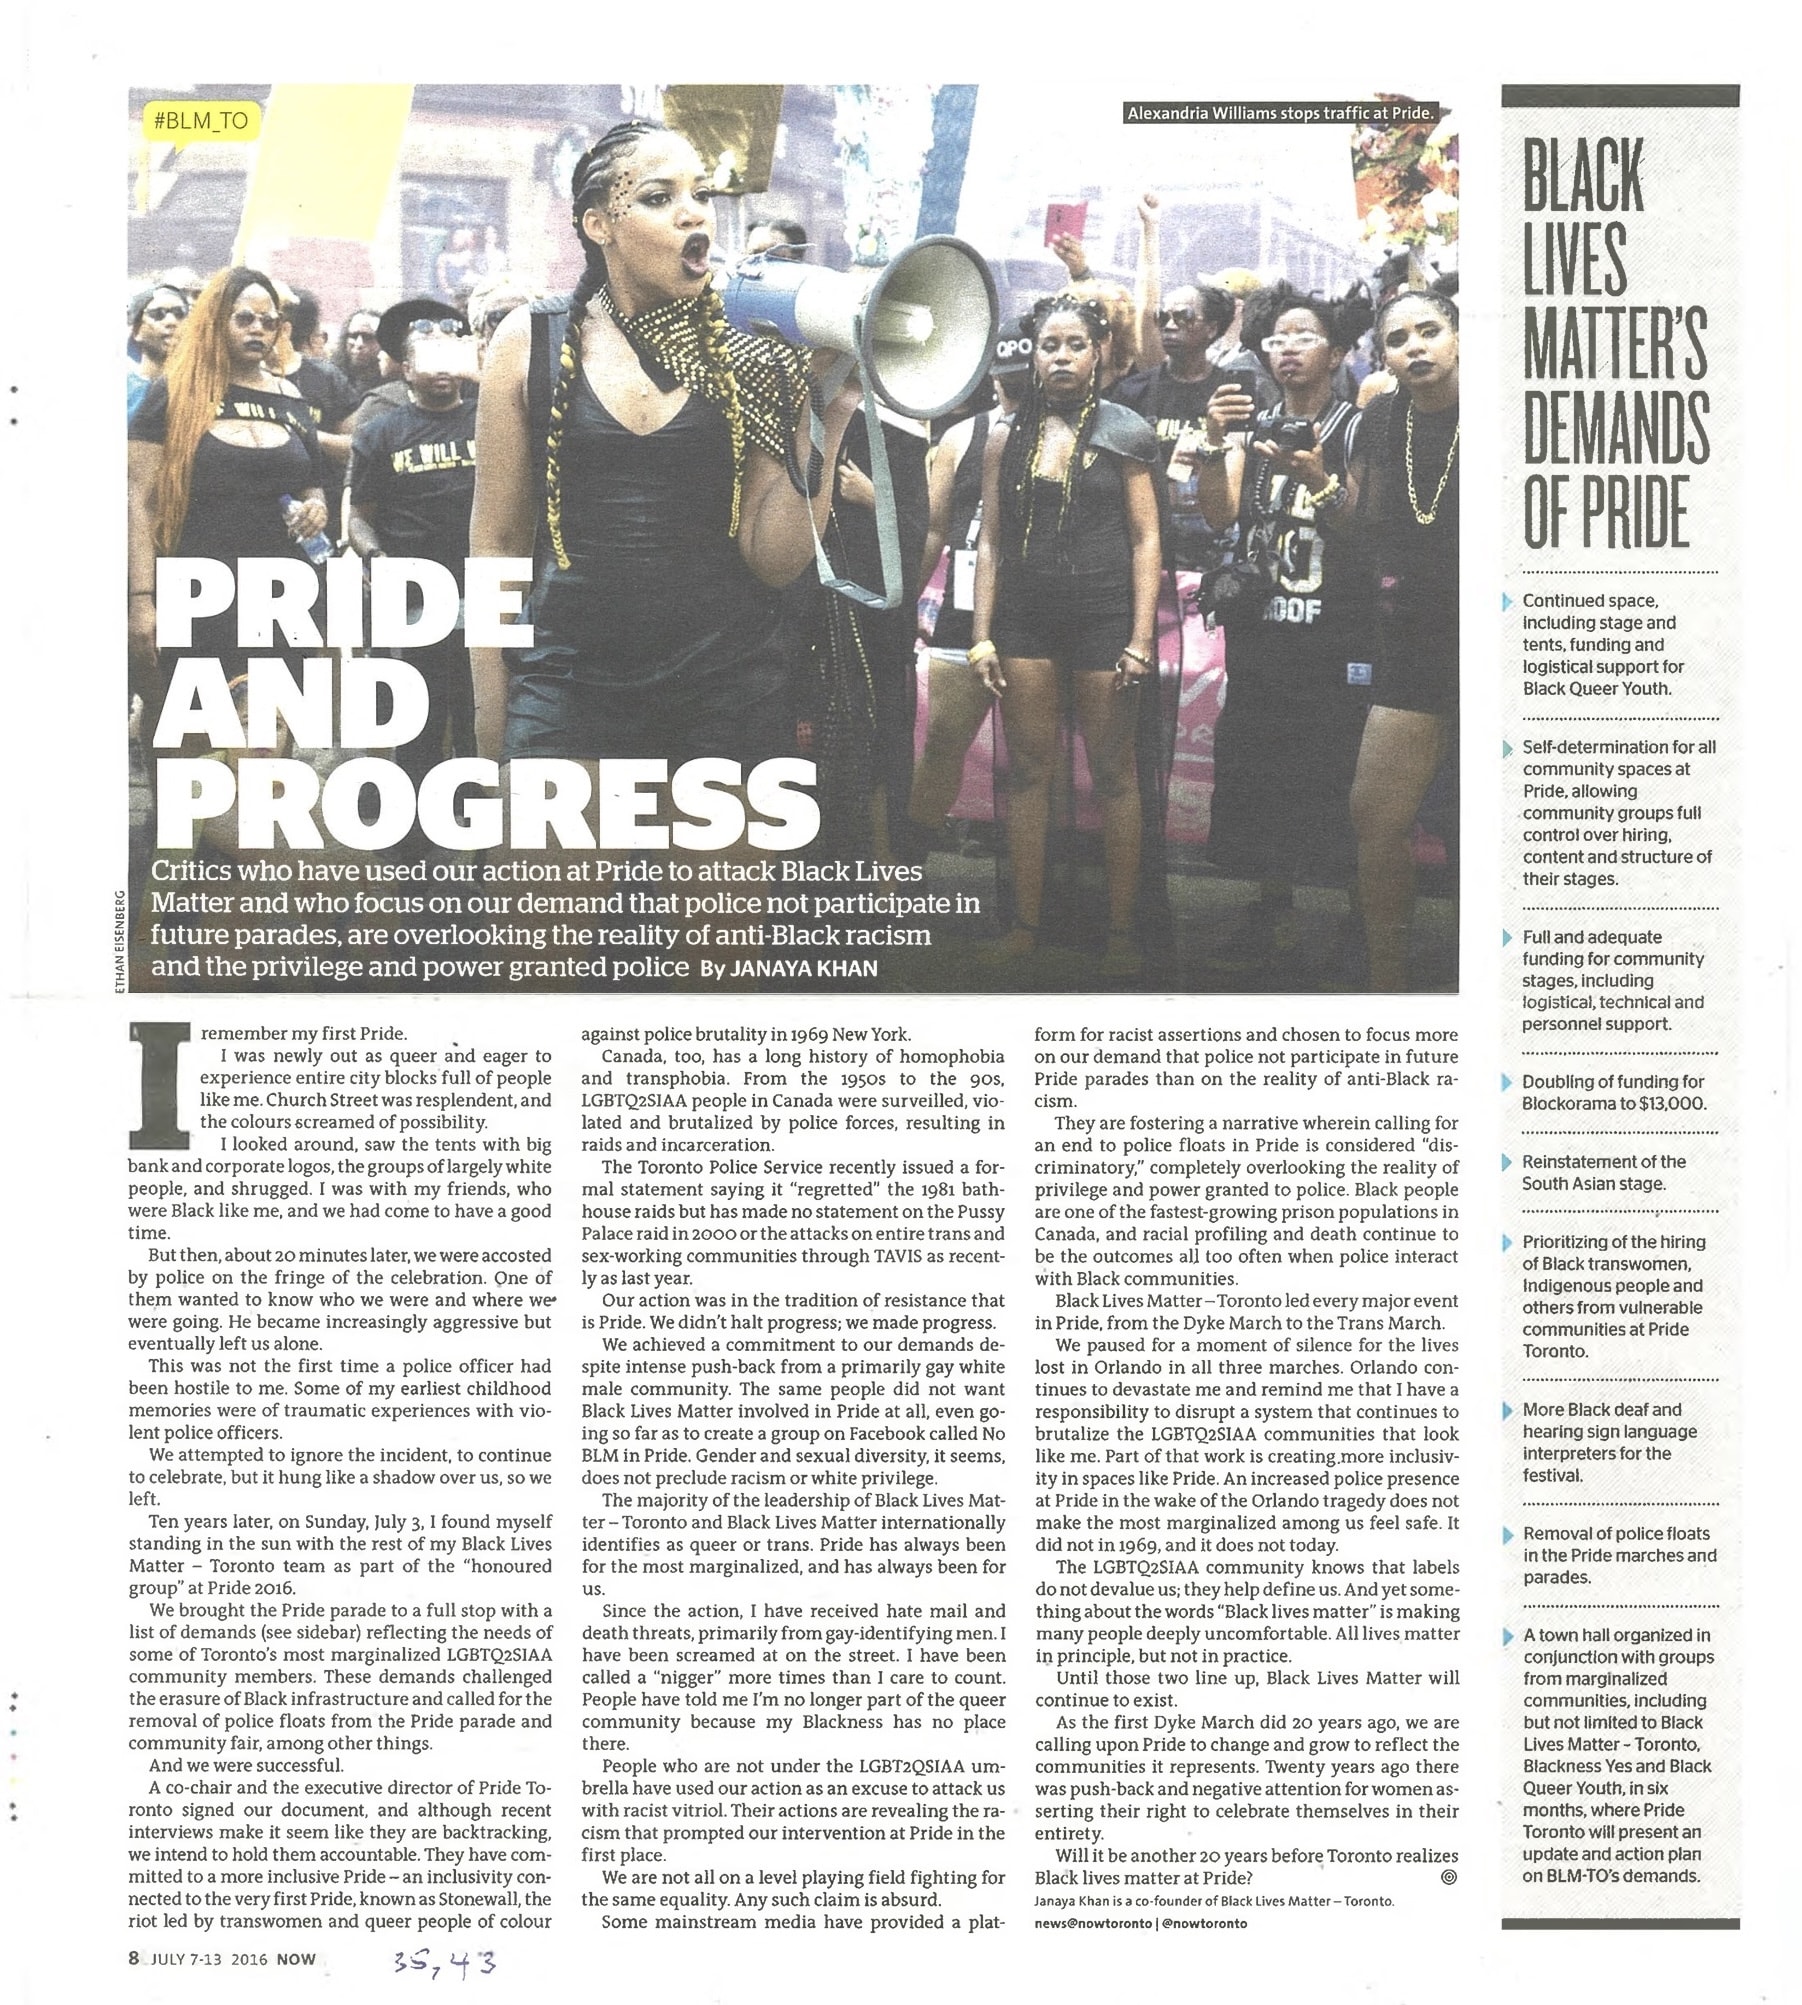 Page from a newsmagazine, including a photo of a person with braided hair and a black dress speaking into a megaphone. Behind them, several other people, most of whom are also dressed in all black, are standing next to one another in a line.